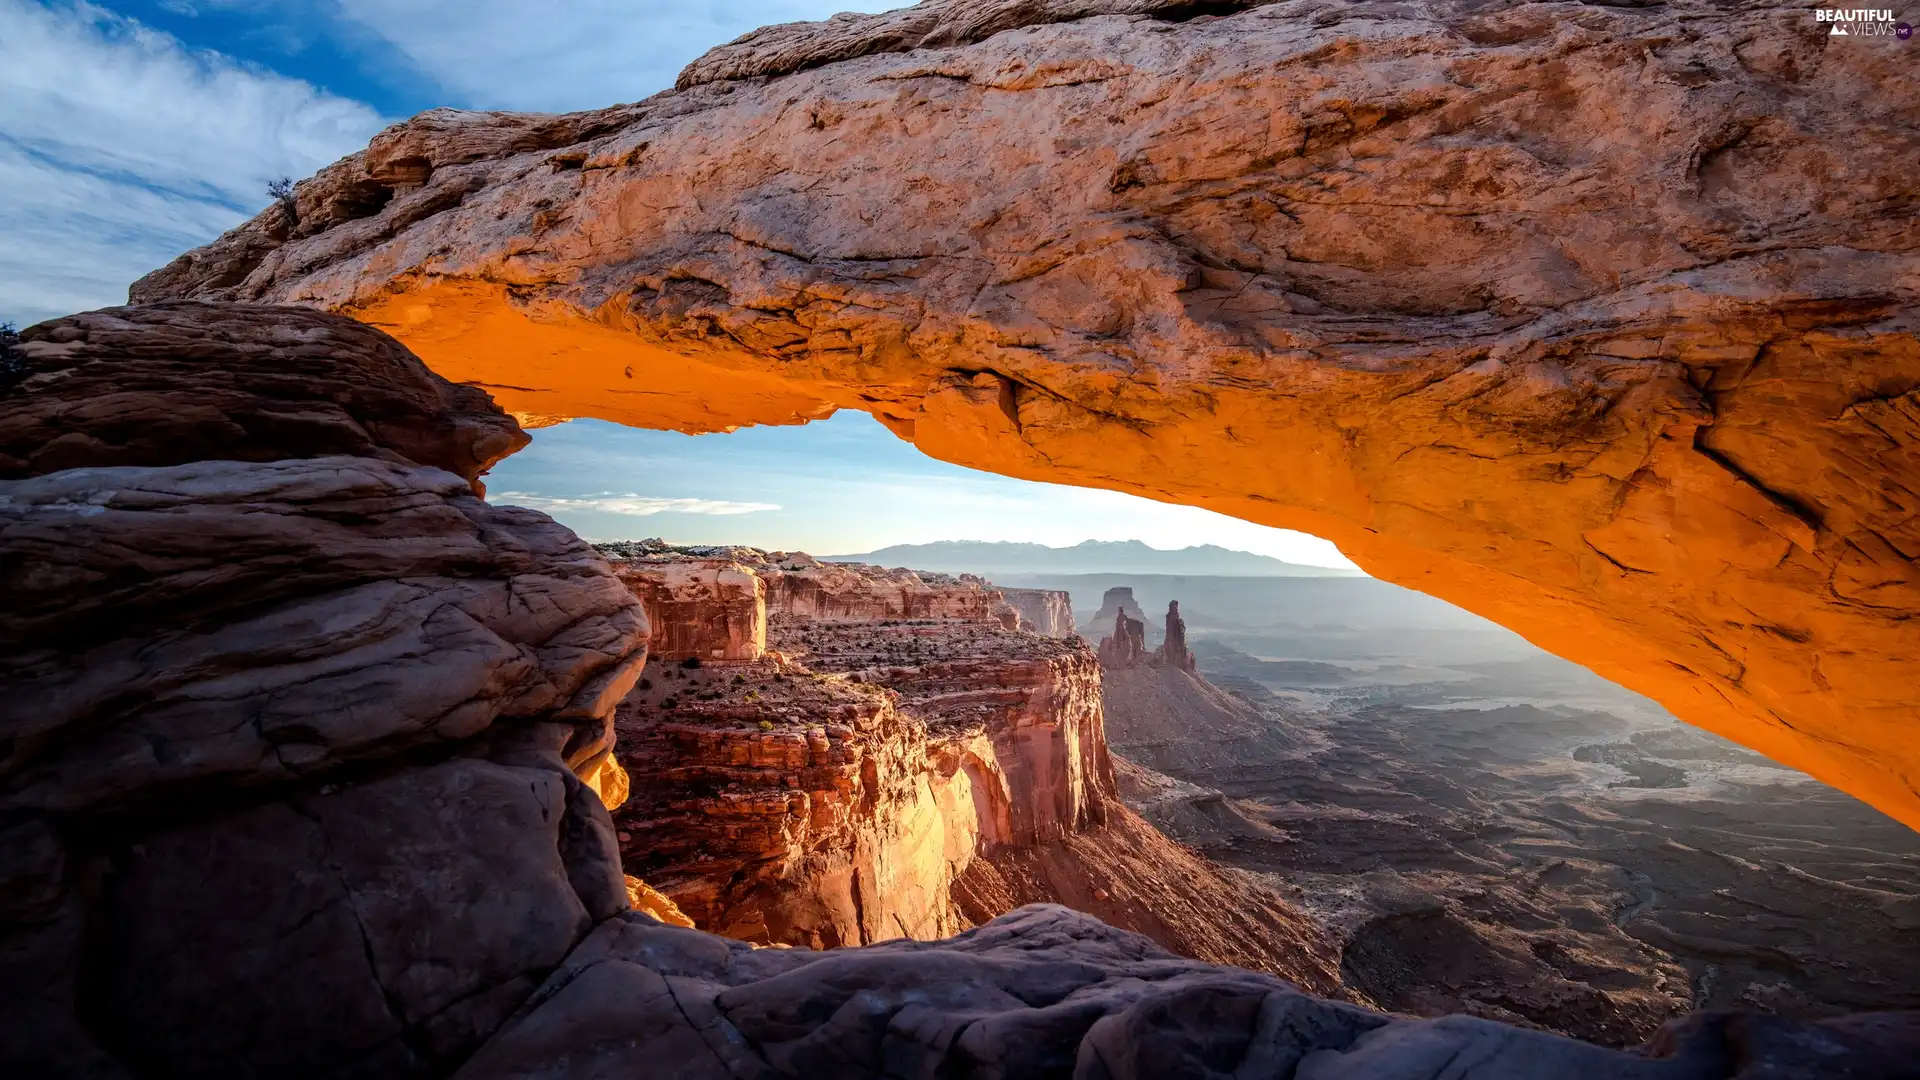 Canyonlands National Park, The United States, rocks, Rock Arch, canyon, Utah State